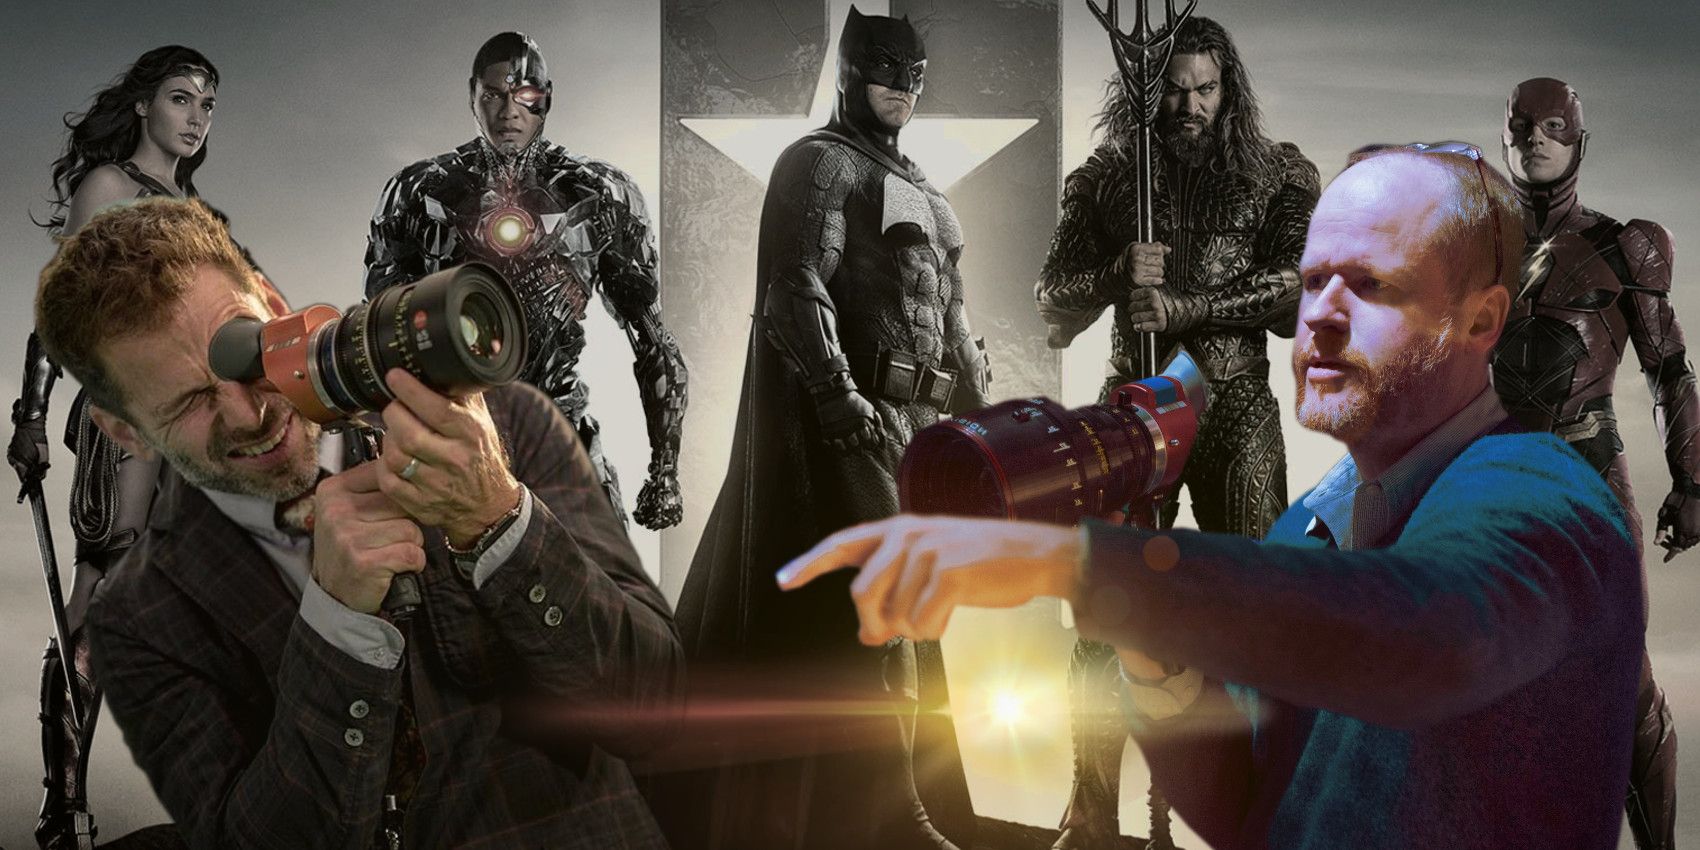 The Snyder Cut Petition & Documentary Fundraiser Are Different